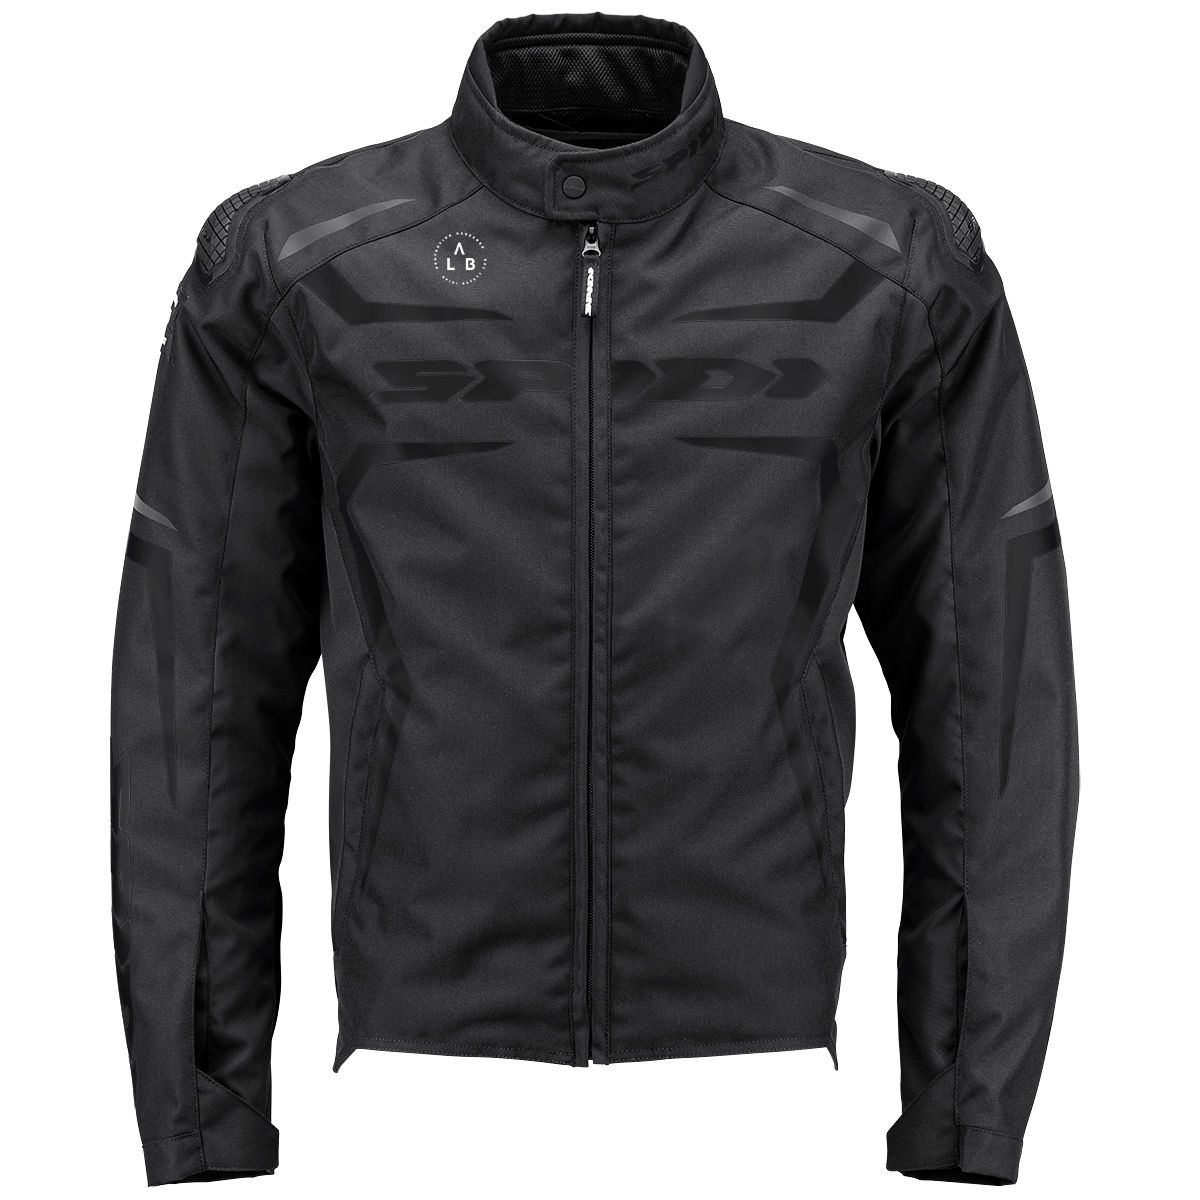 Image of Spidi Race-Evo H2Out Jacket Black Size L ID 8030161460377